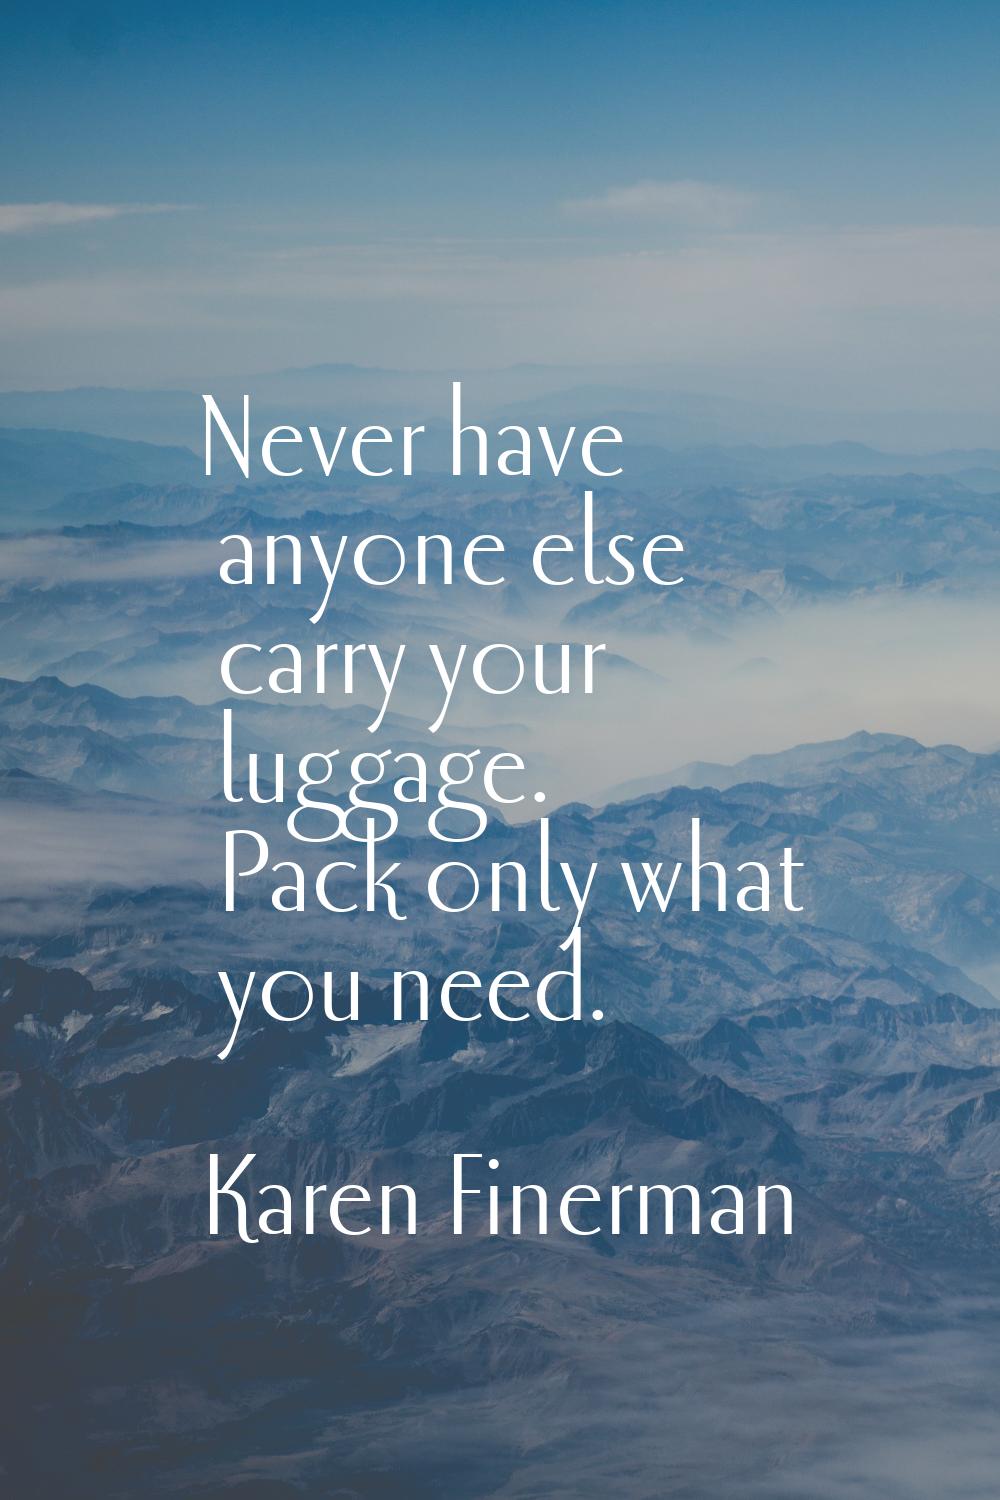 Never have anyone else carry your luggage. Pack only what you need.